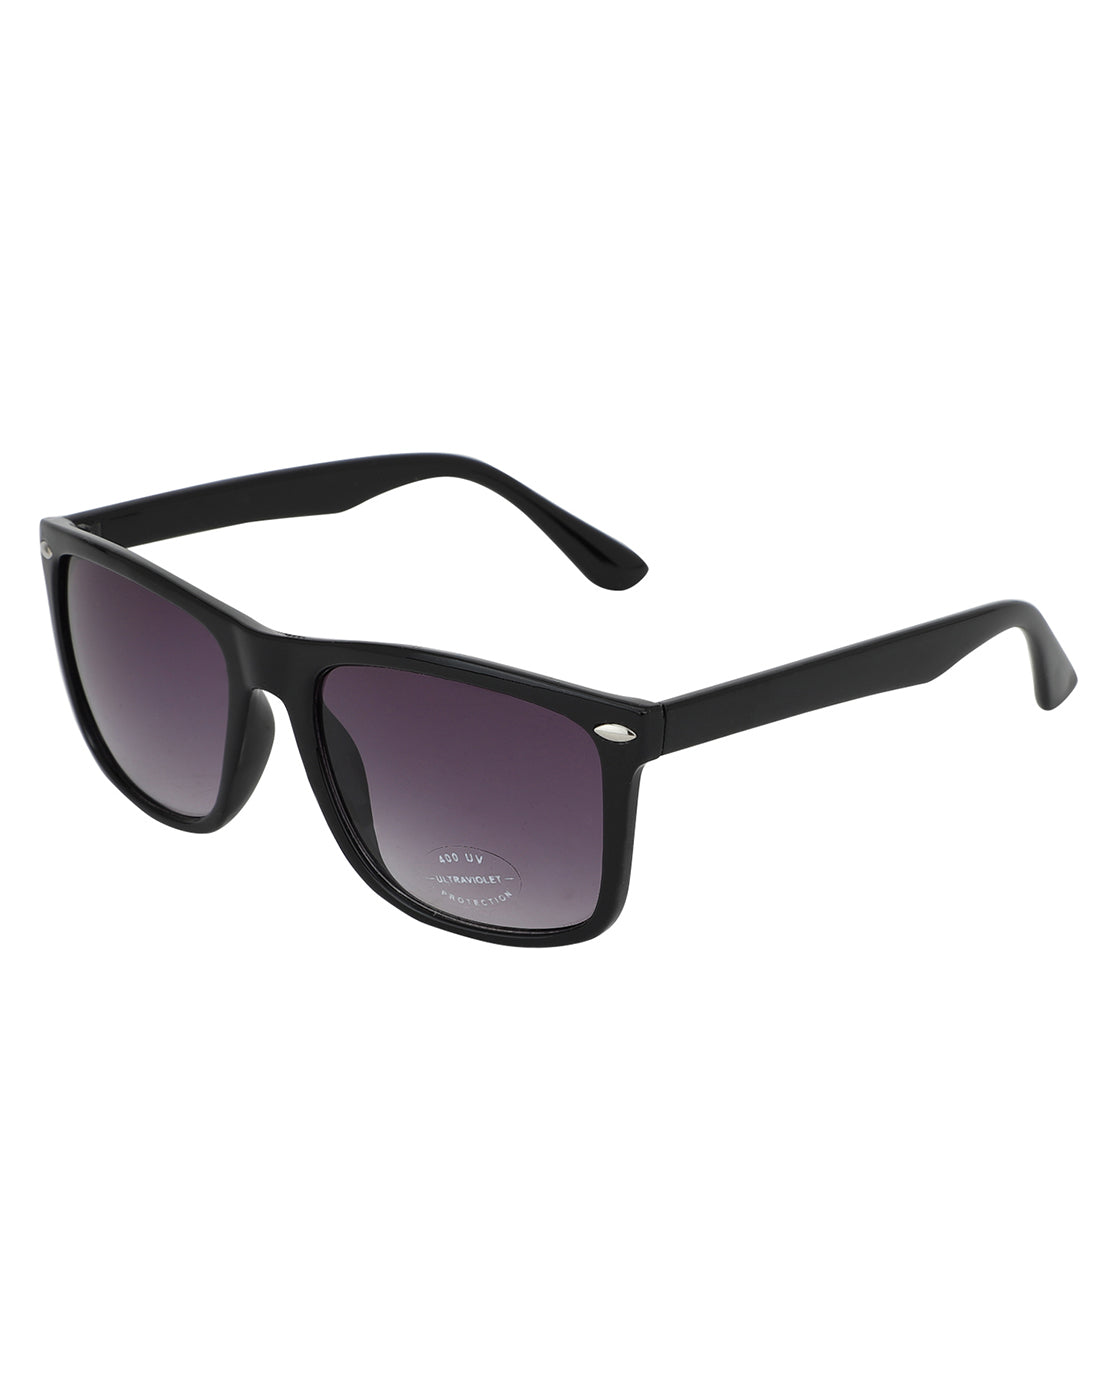 NEW WAYFARER CLASSIC Sunglasses in Black and Green - RB2132 | Ray-Ban® US